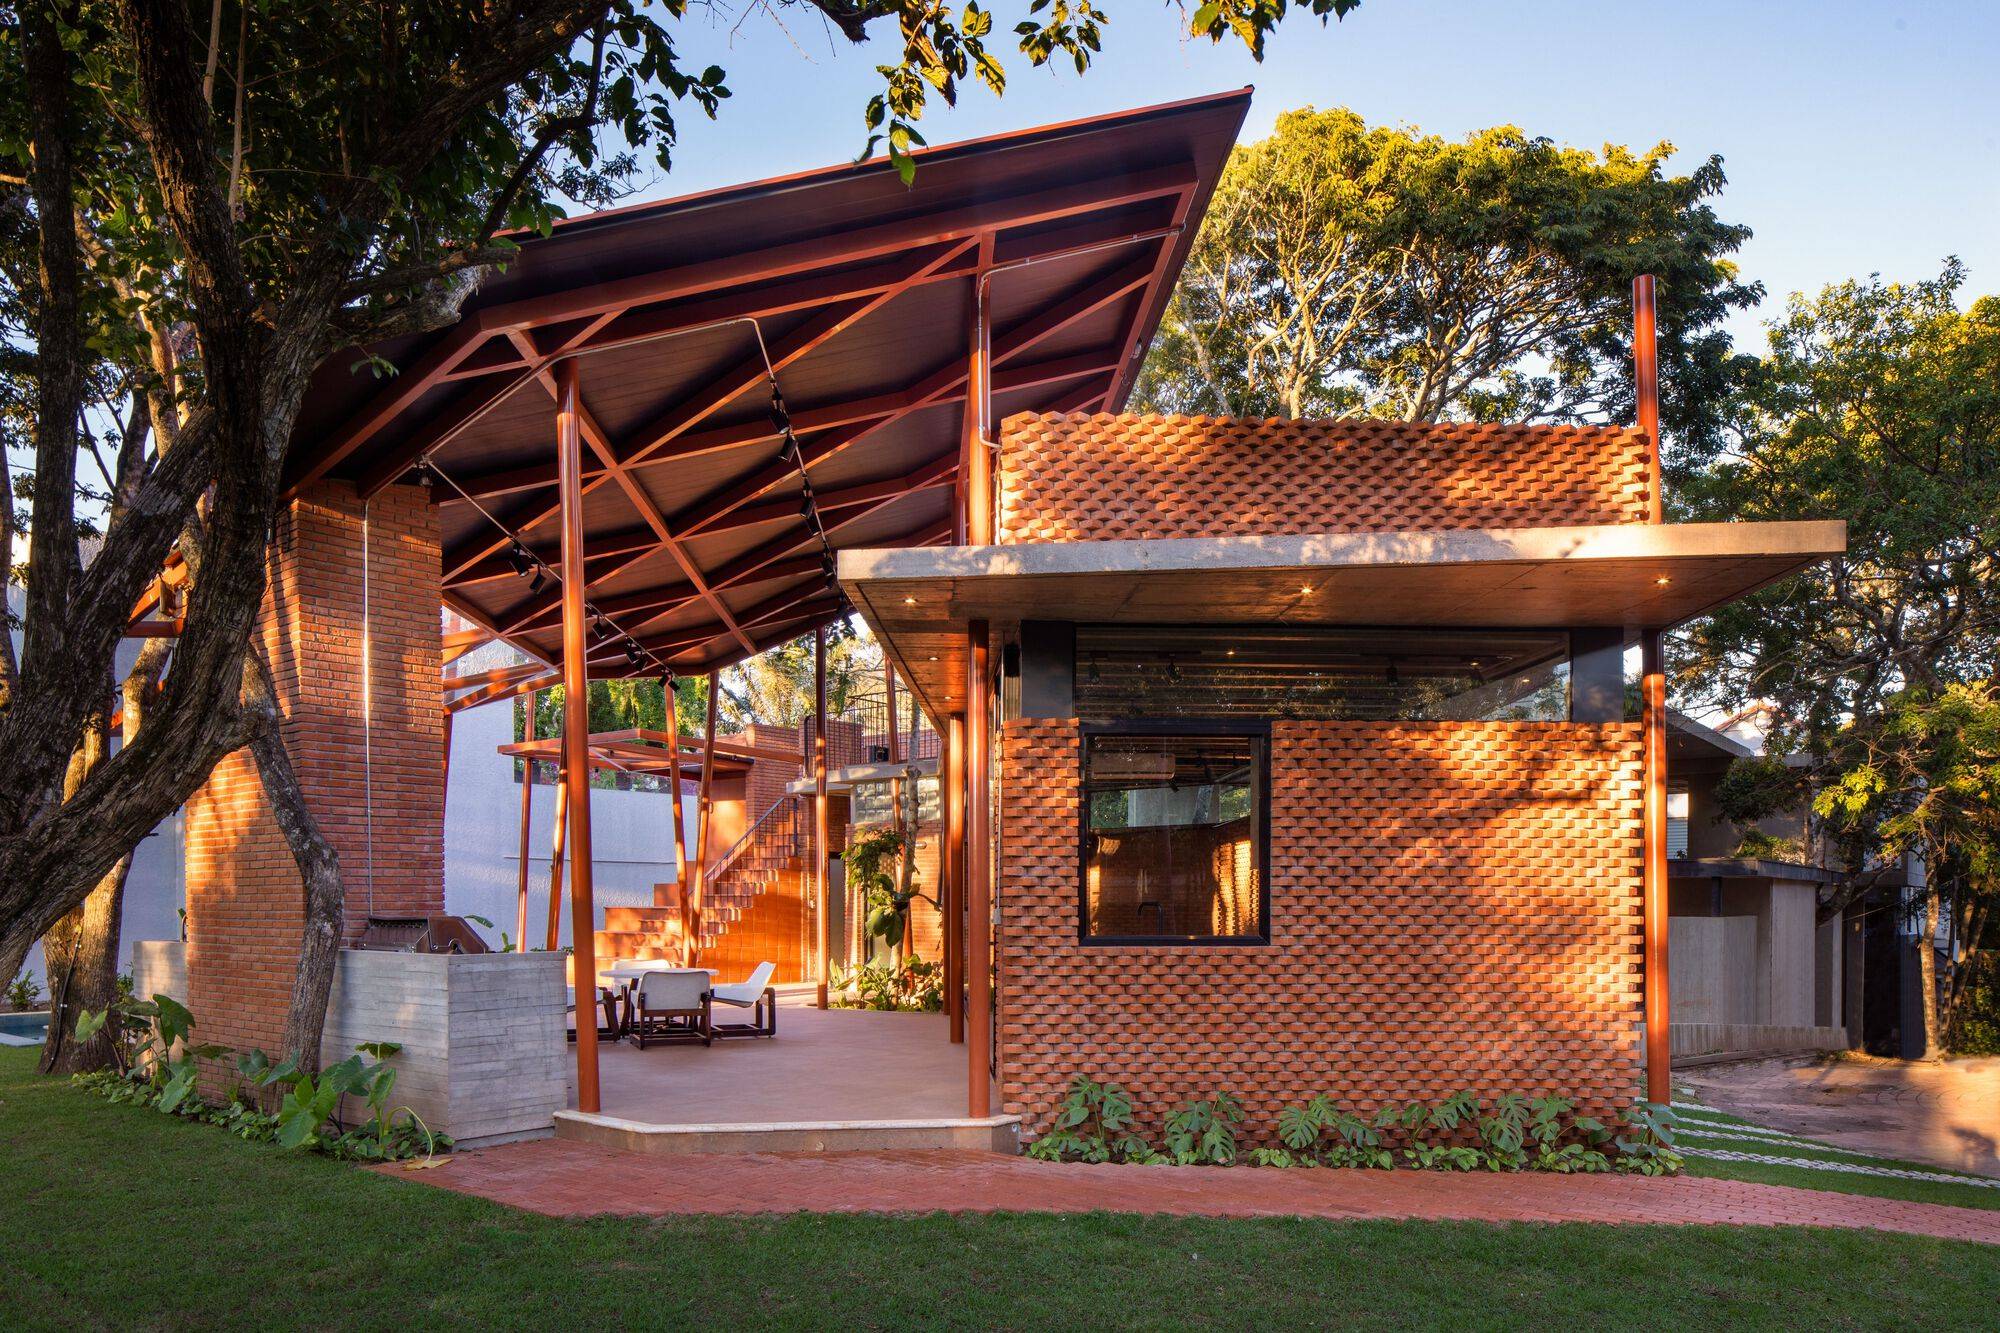 Traditional building materials are combined with modern farm for this backyard retreat created using clay bricks